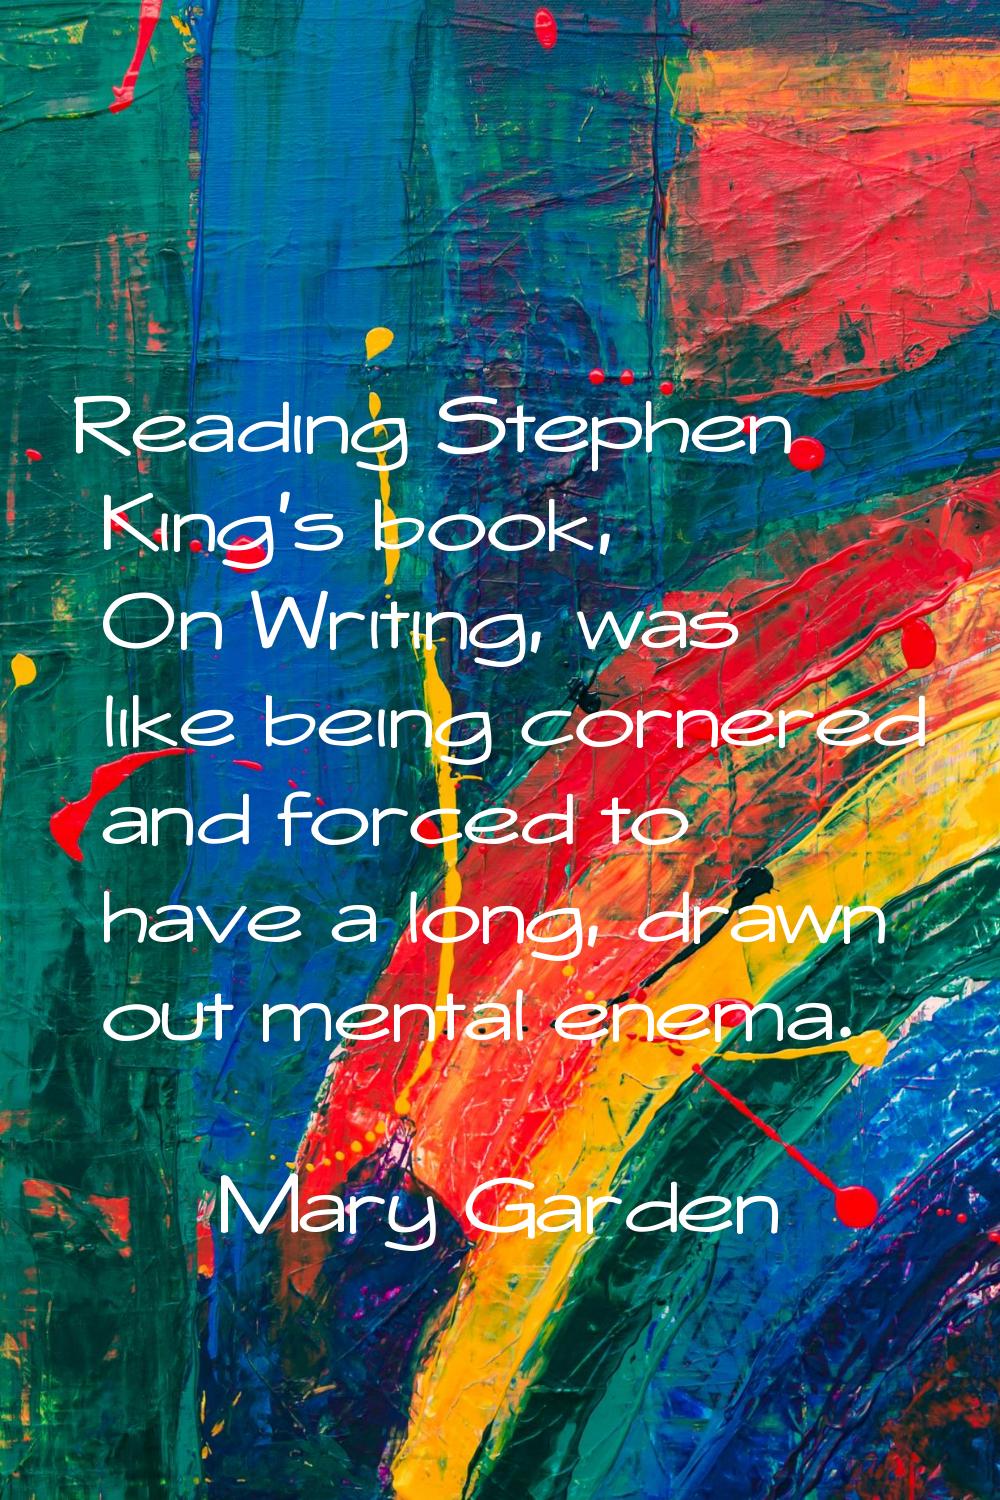 Reading Stephen King's book, On Writing, was like being cornered and forced to have a long, drawn o